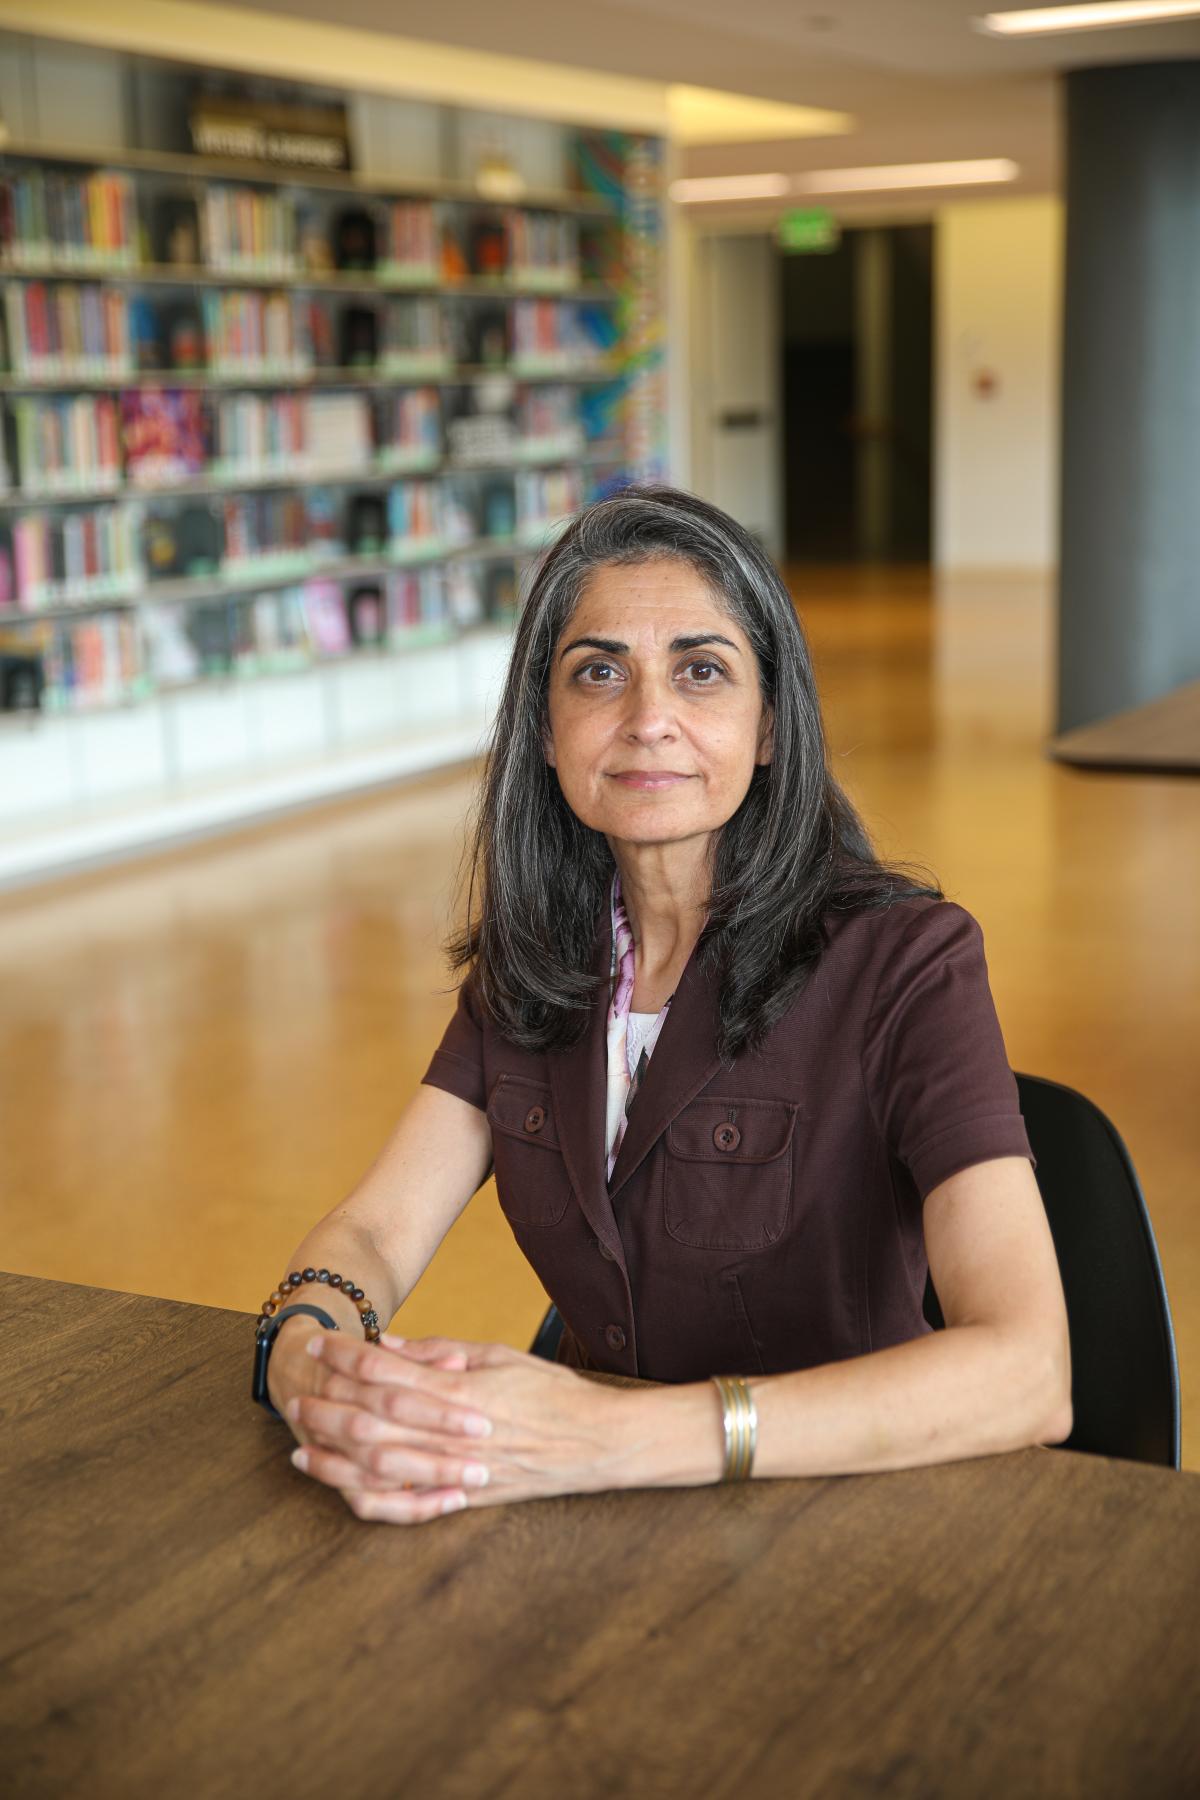 Pamela Bhatti seated at a table in the library with bookshelves in the background